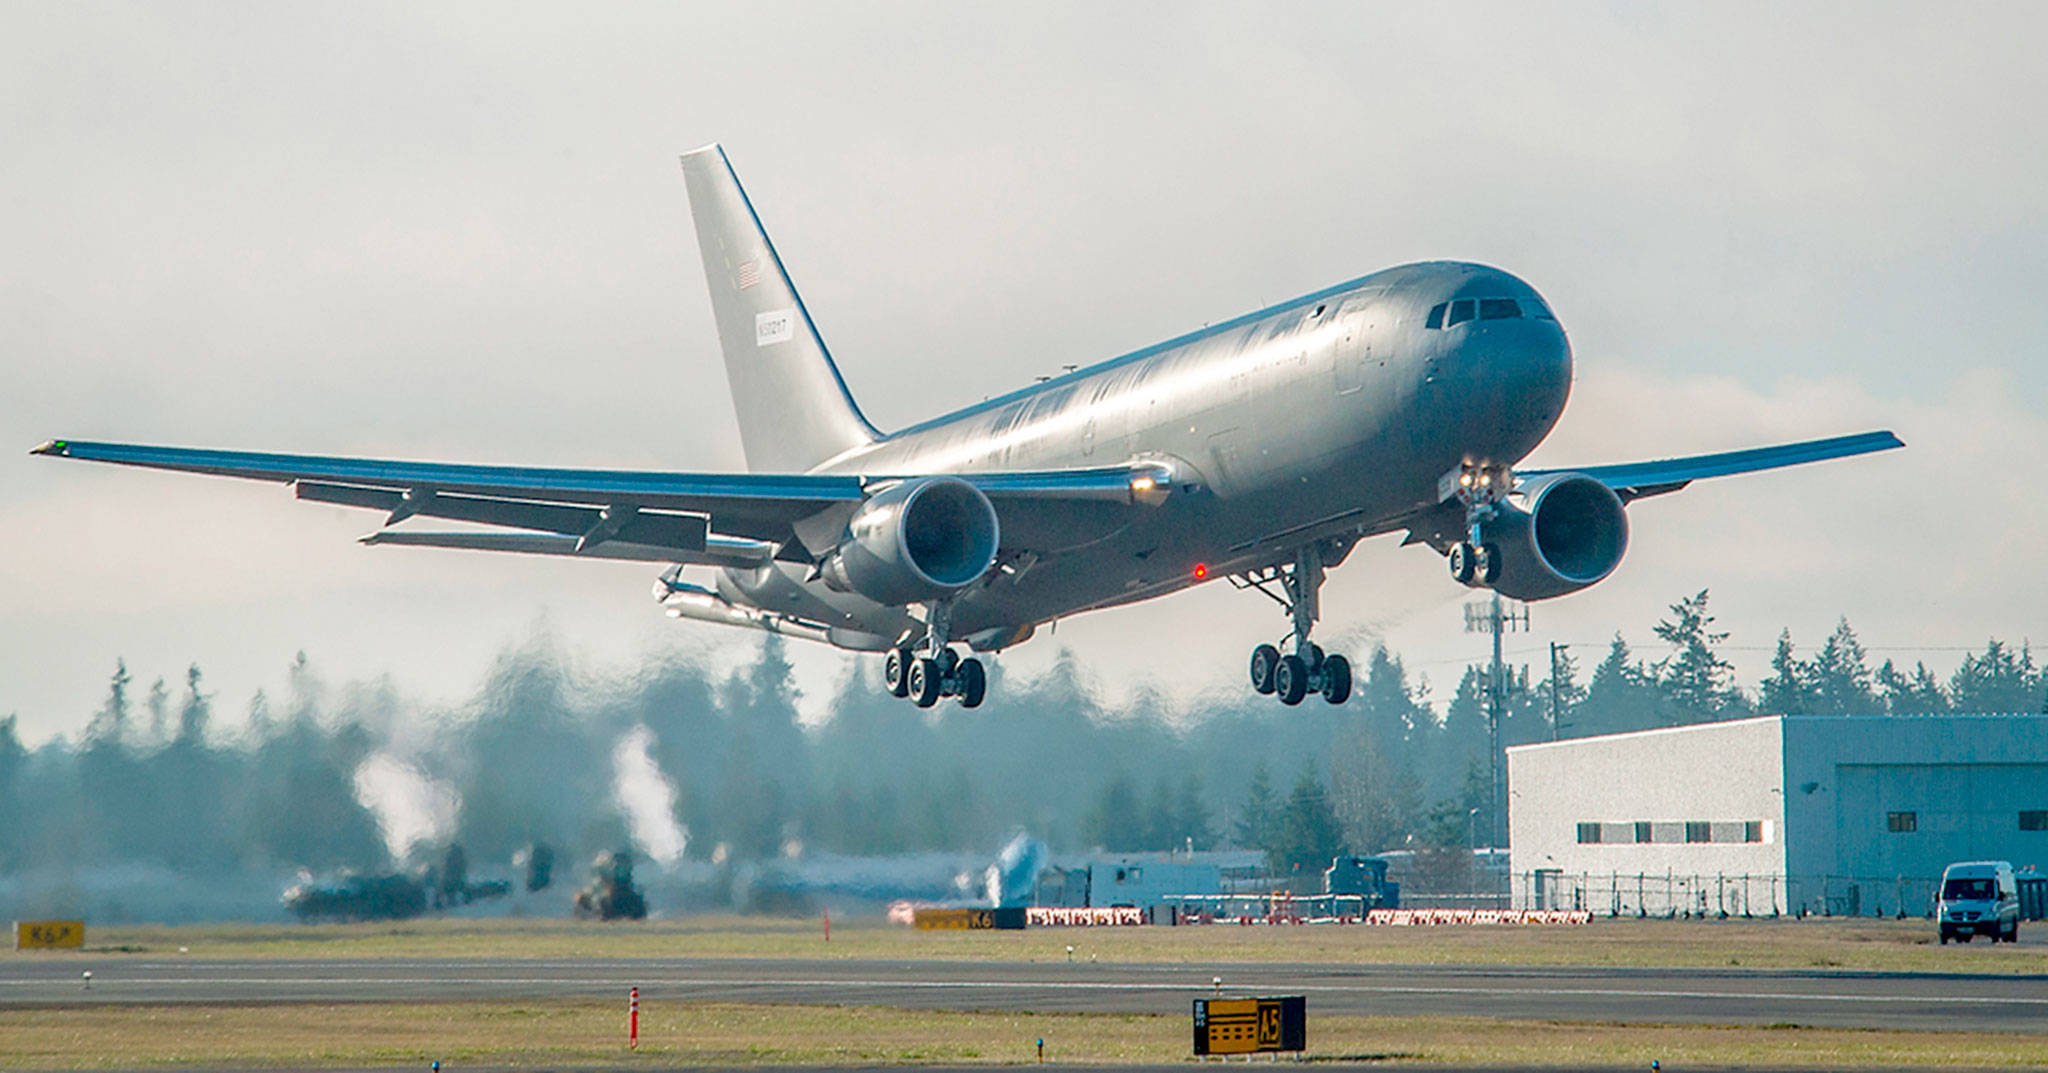 A Boeing KC-46 tanker takes off from Paine Field in Everett on a test flight. (Marian Lockhart/Boeing)